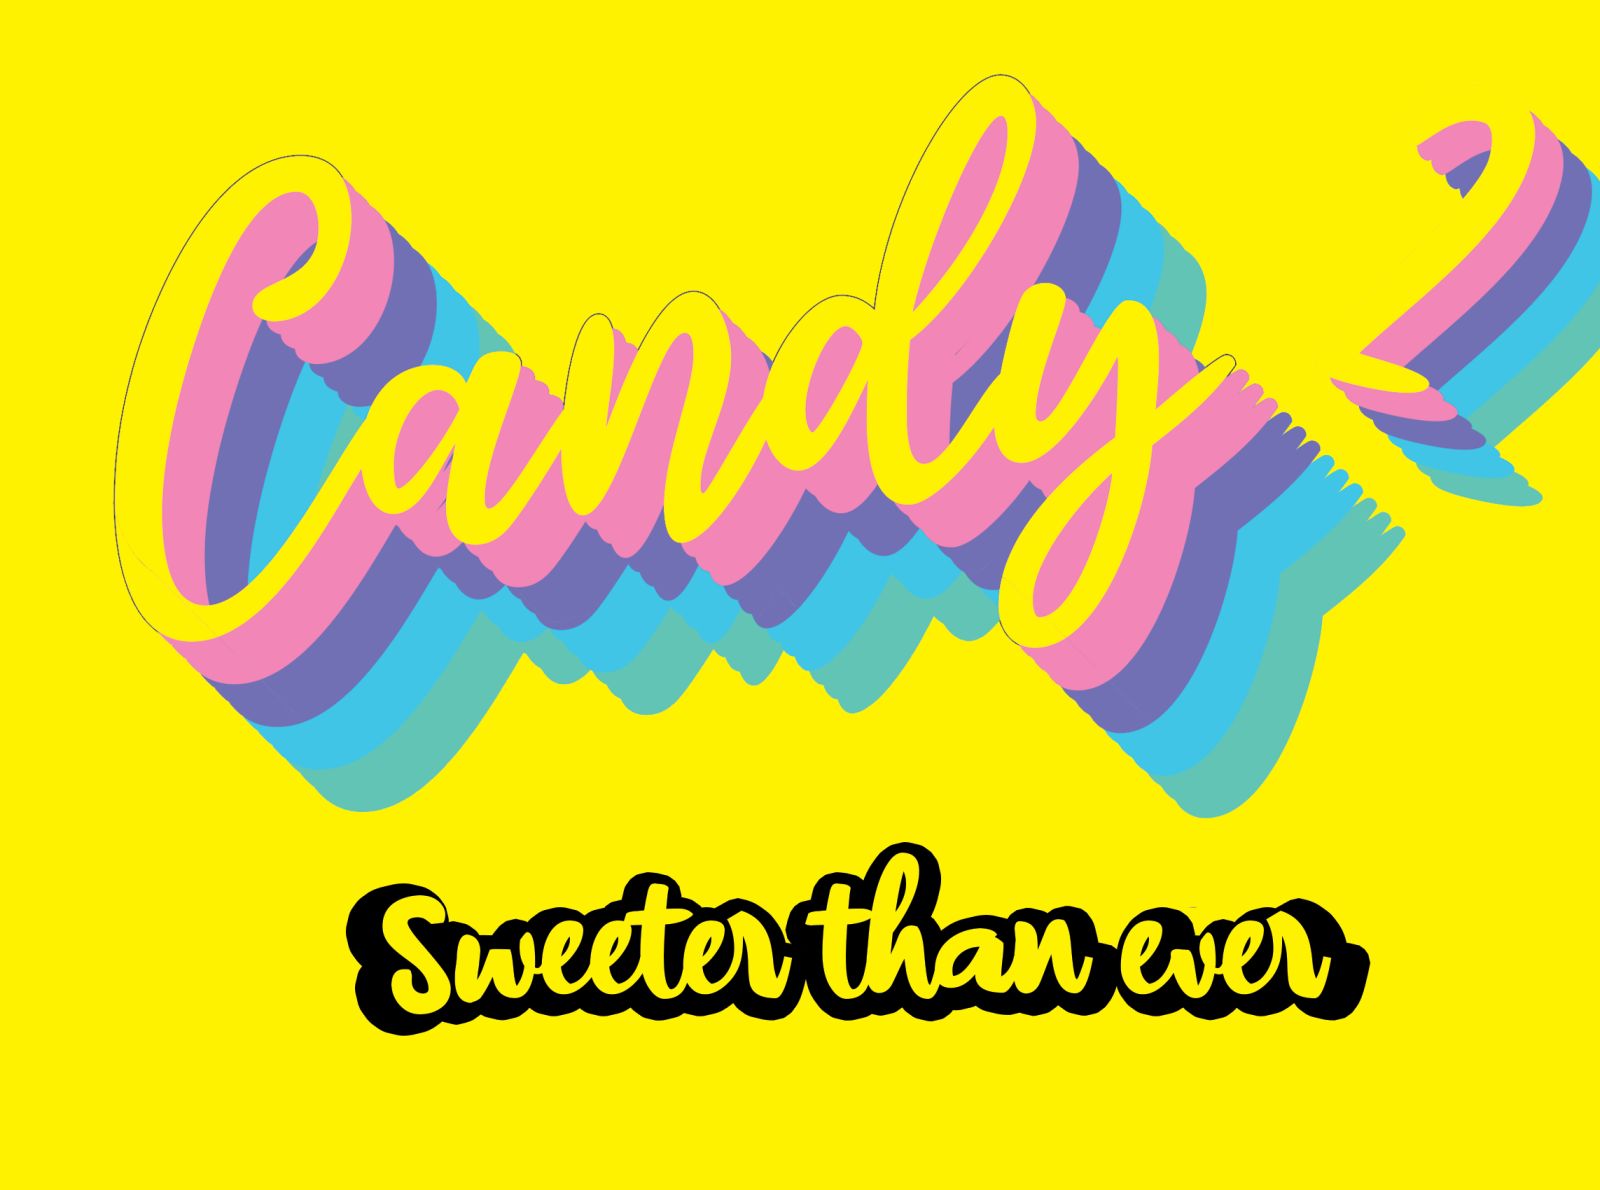 Candy, candy, candy... by Ricardo Lopez on Dribbble